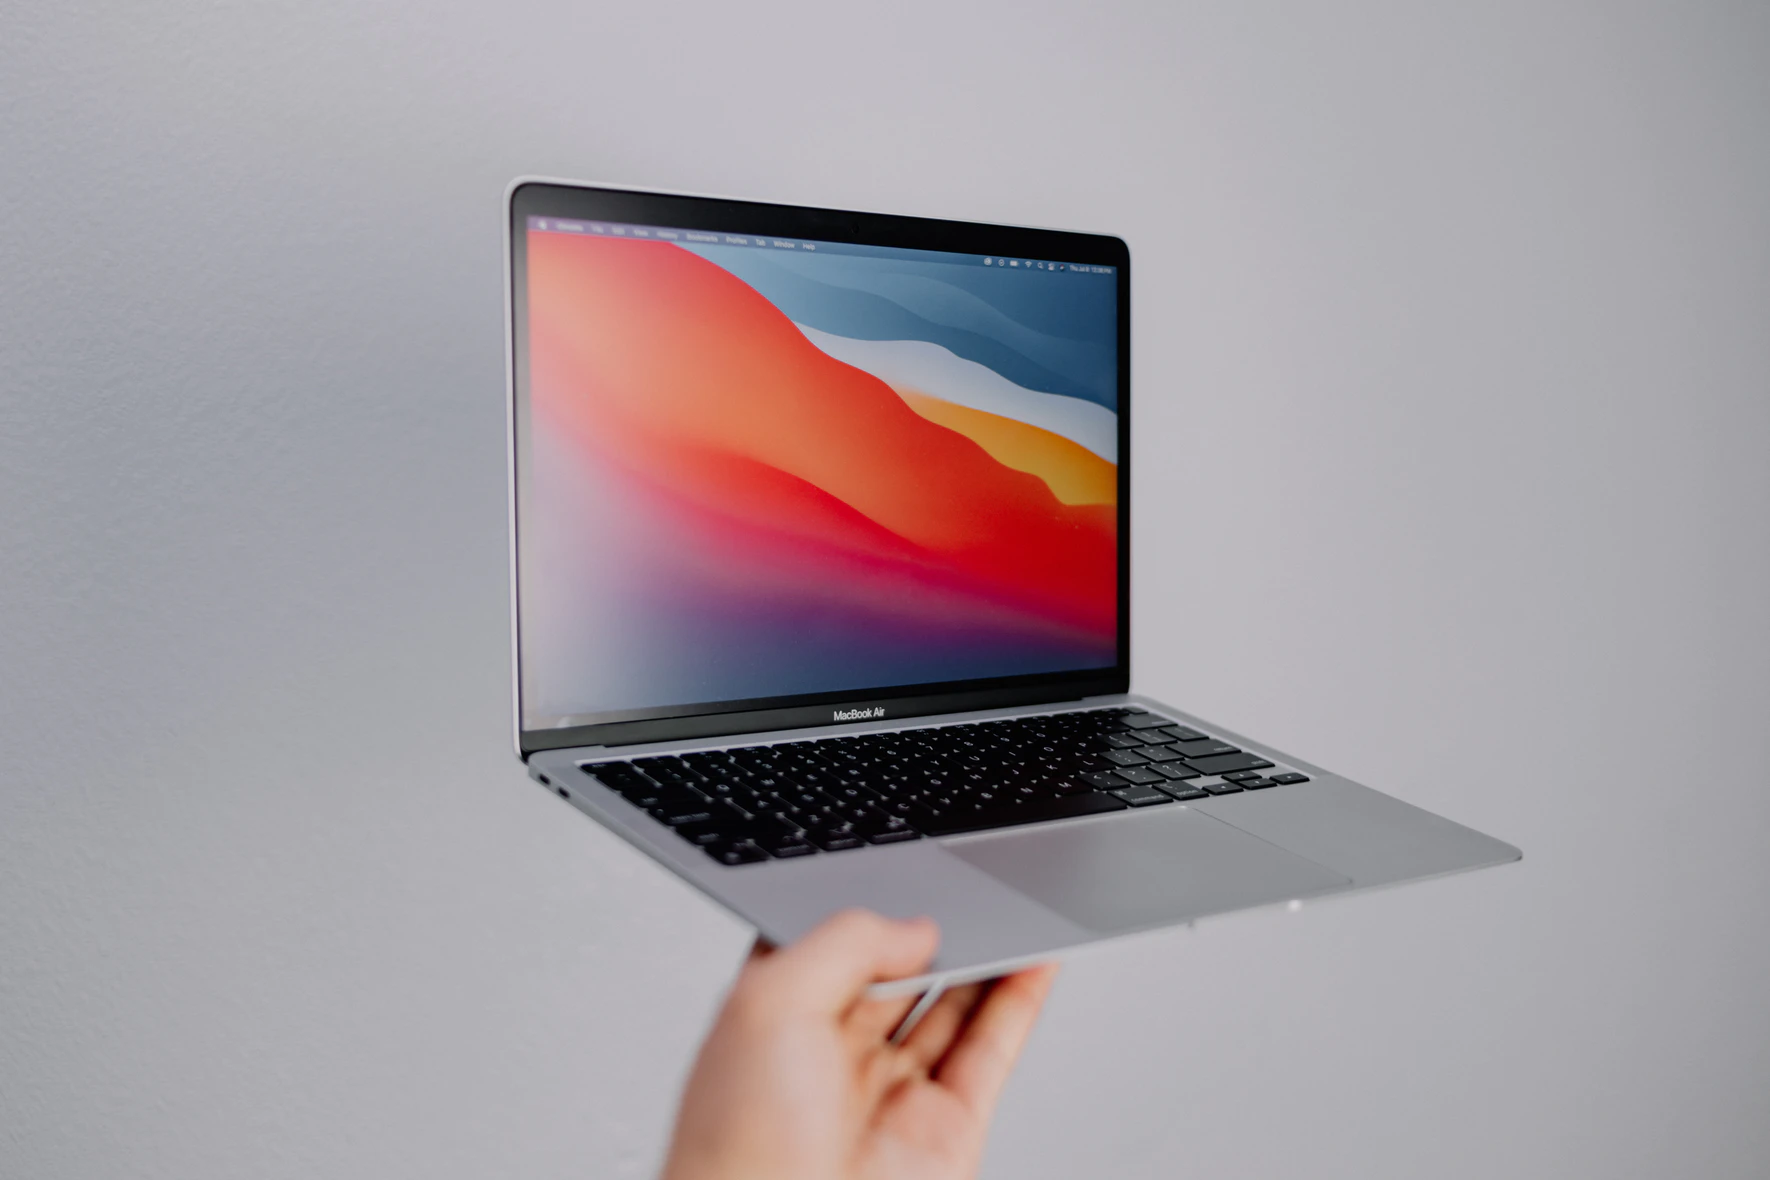 Launch Later Gizmochina To MacBook Air This 15-Inch Rumored - Apple\'s Year